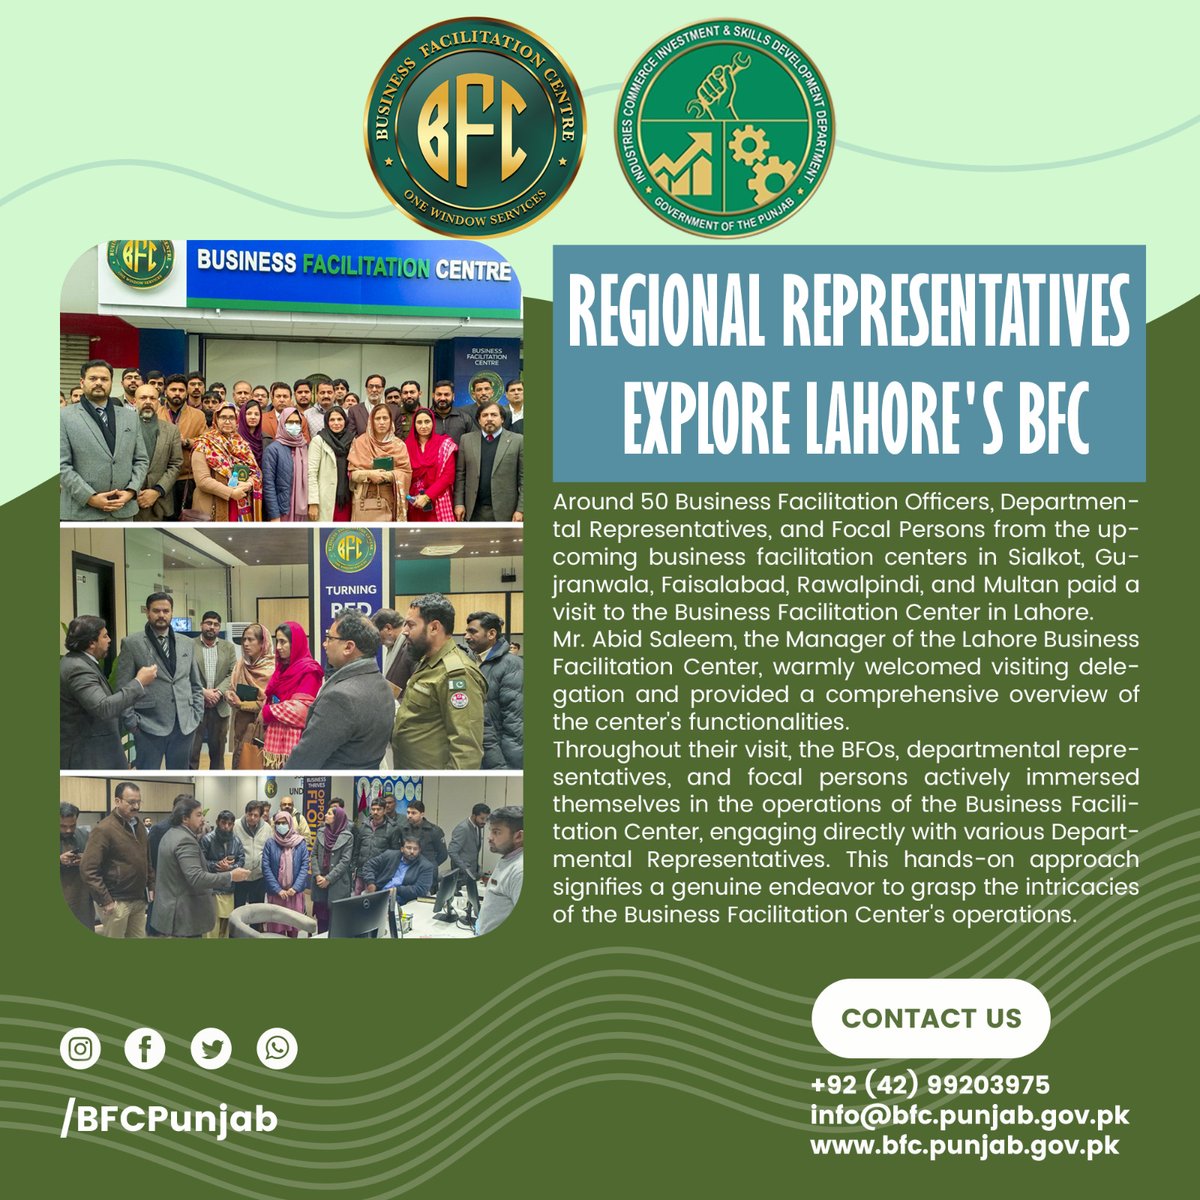 Regional Representatives explore the BFC, 
engaging in a dynamic session with department representatives. This immersive experience underscores a sincere commitment to fostering collaboration and understanding between diverse stakeholders. #regionalcollaboration